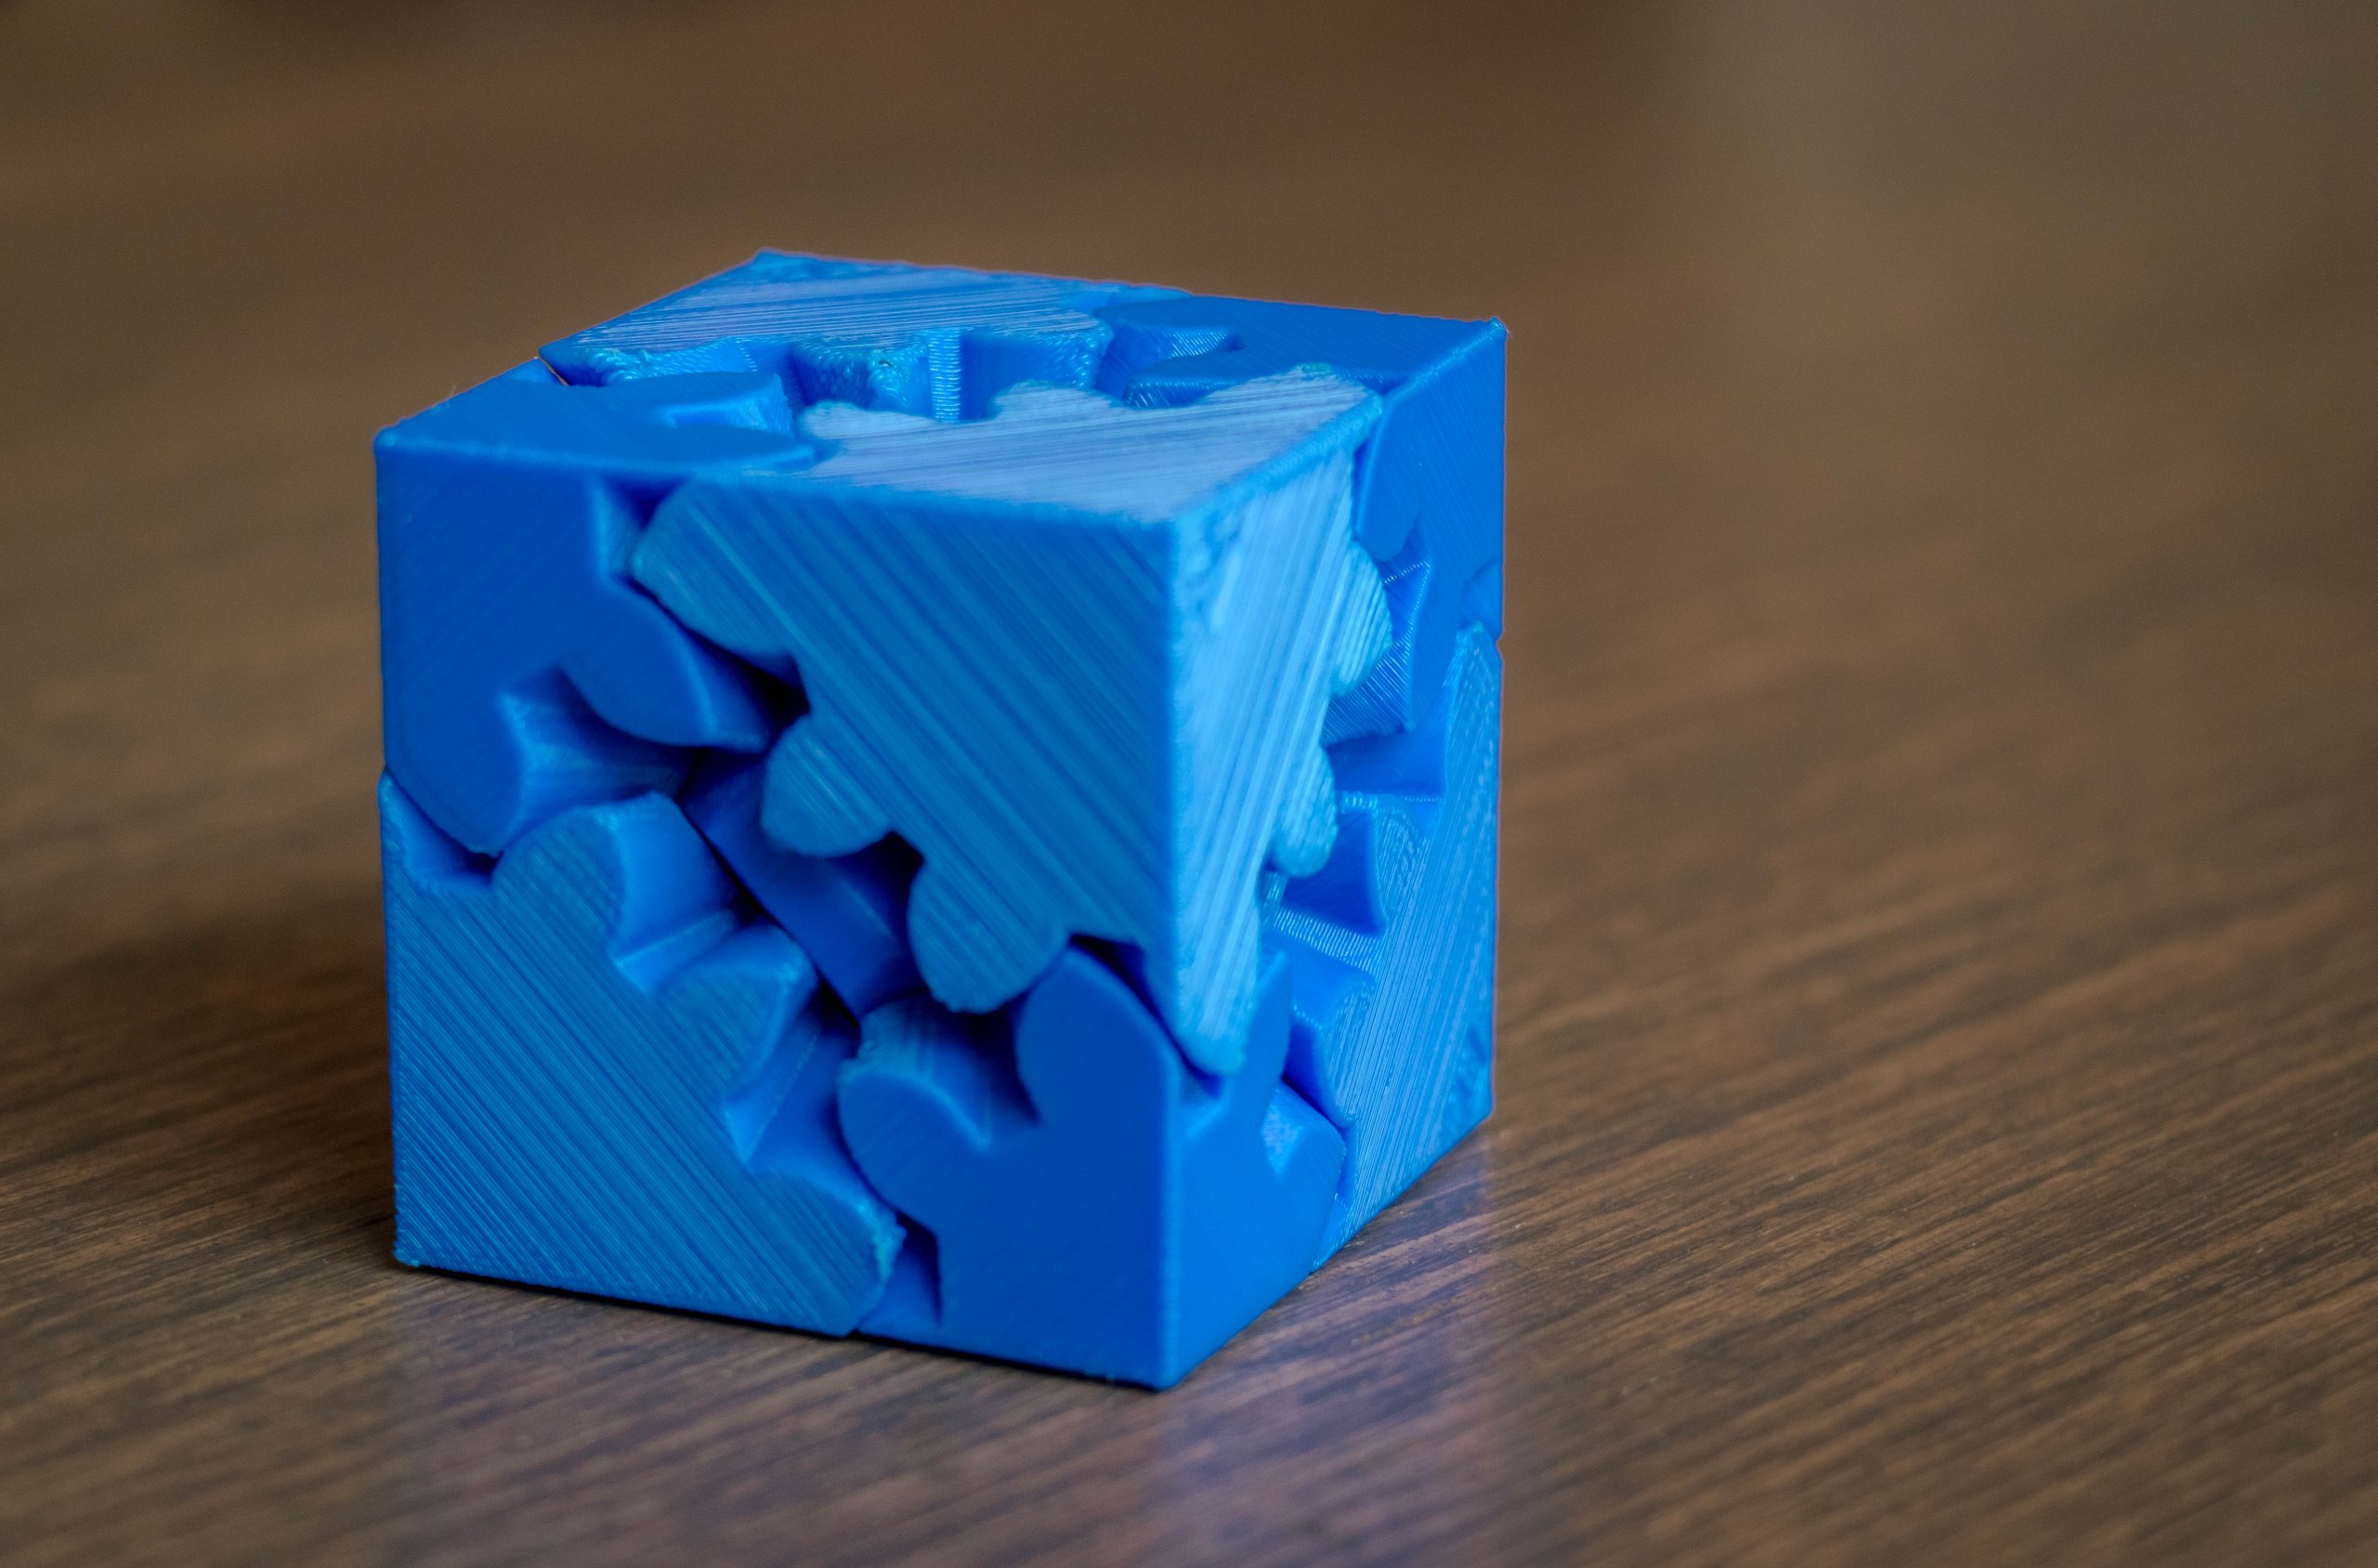 3D Printed Cube Gears Puzzle from 3DPStuff on Tindie